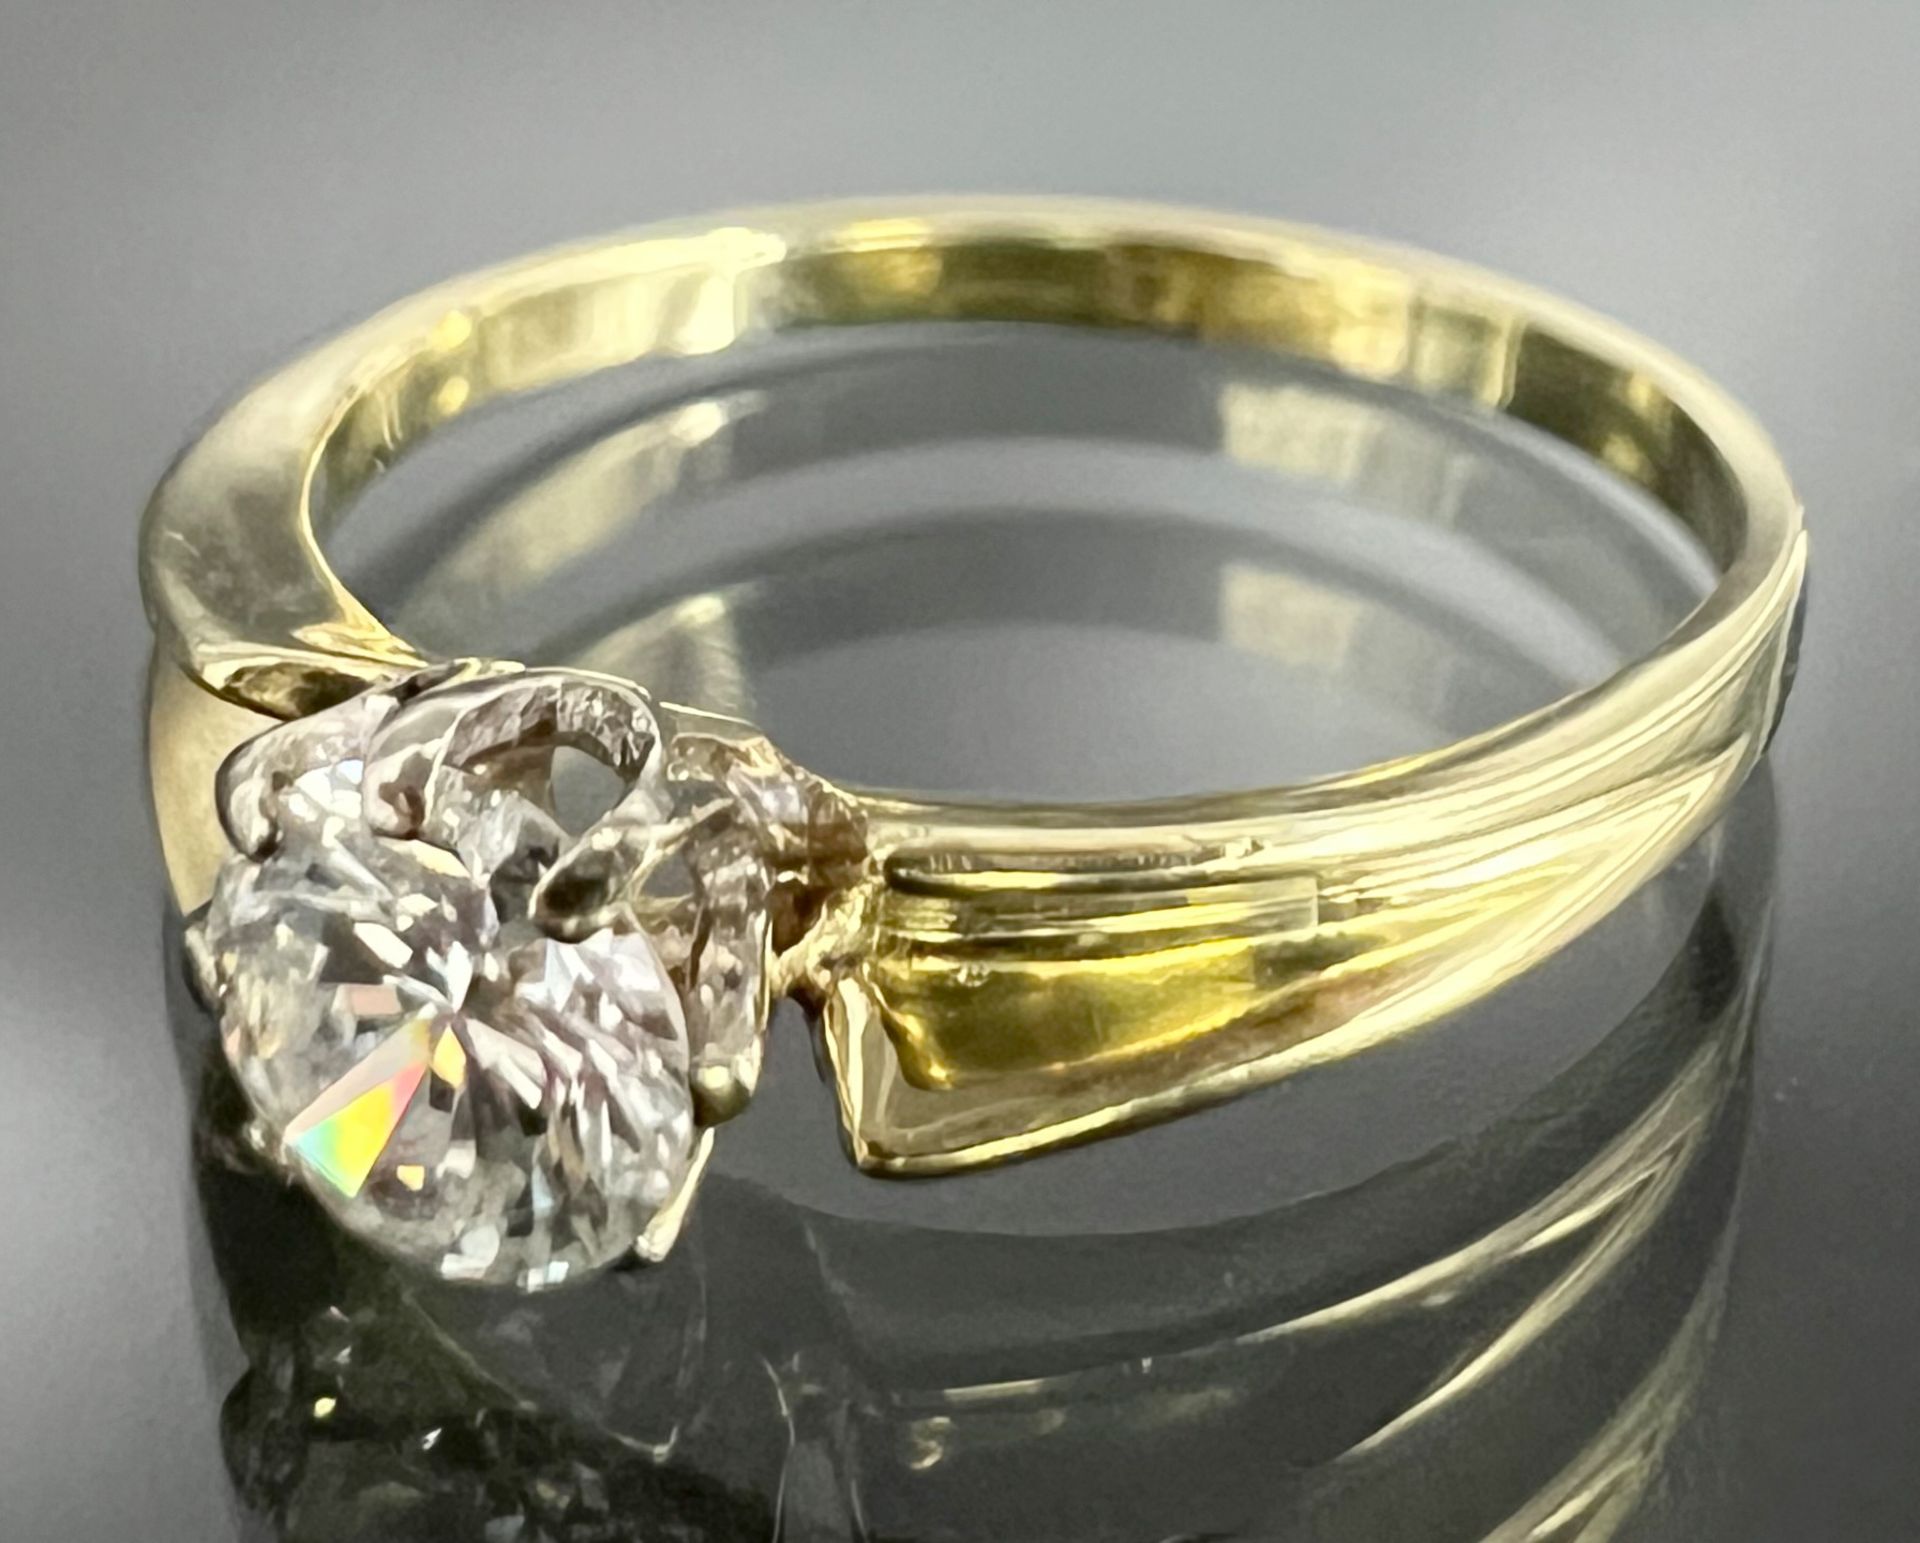 Solitaire ring 585 yellow gold with a brilliant-cut diamond of approx. 0.45 ct.